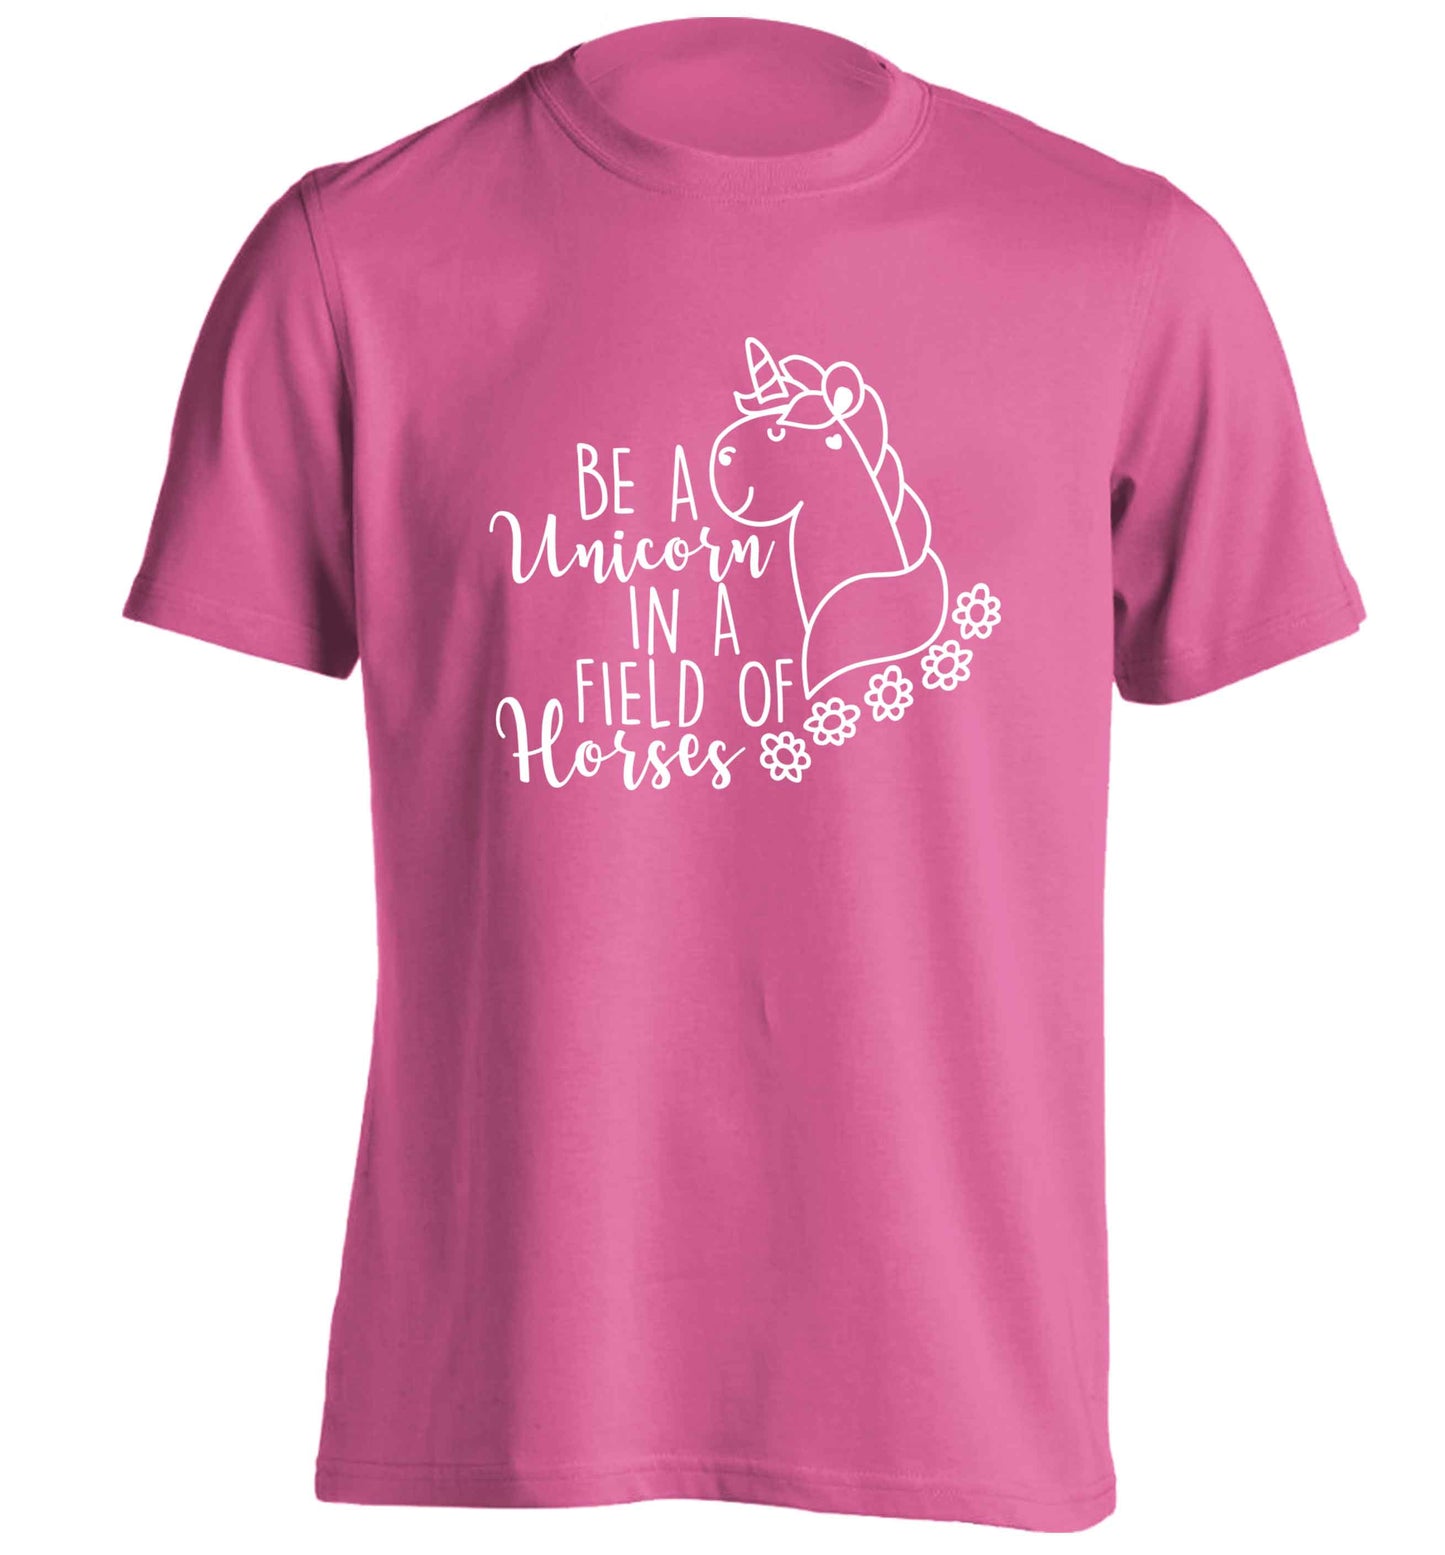 Be a unicorn in a field of horses adults unisex pink Tshirt 2XL